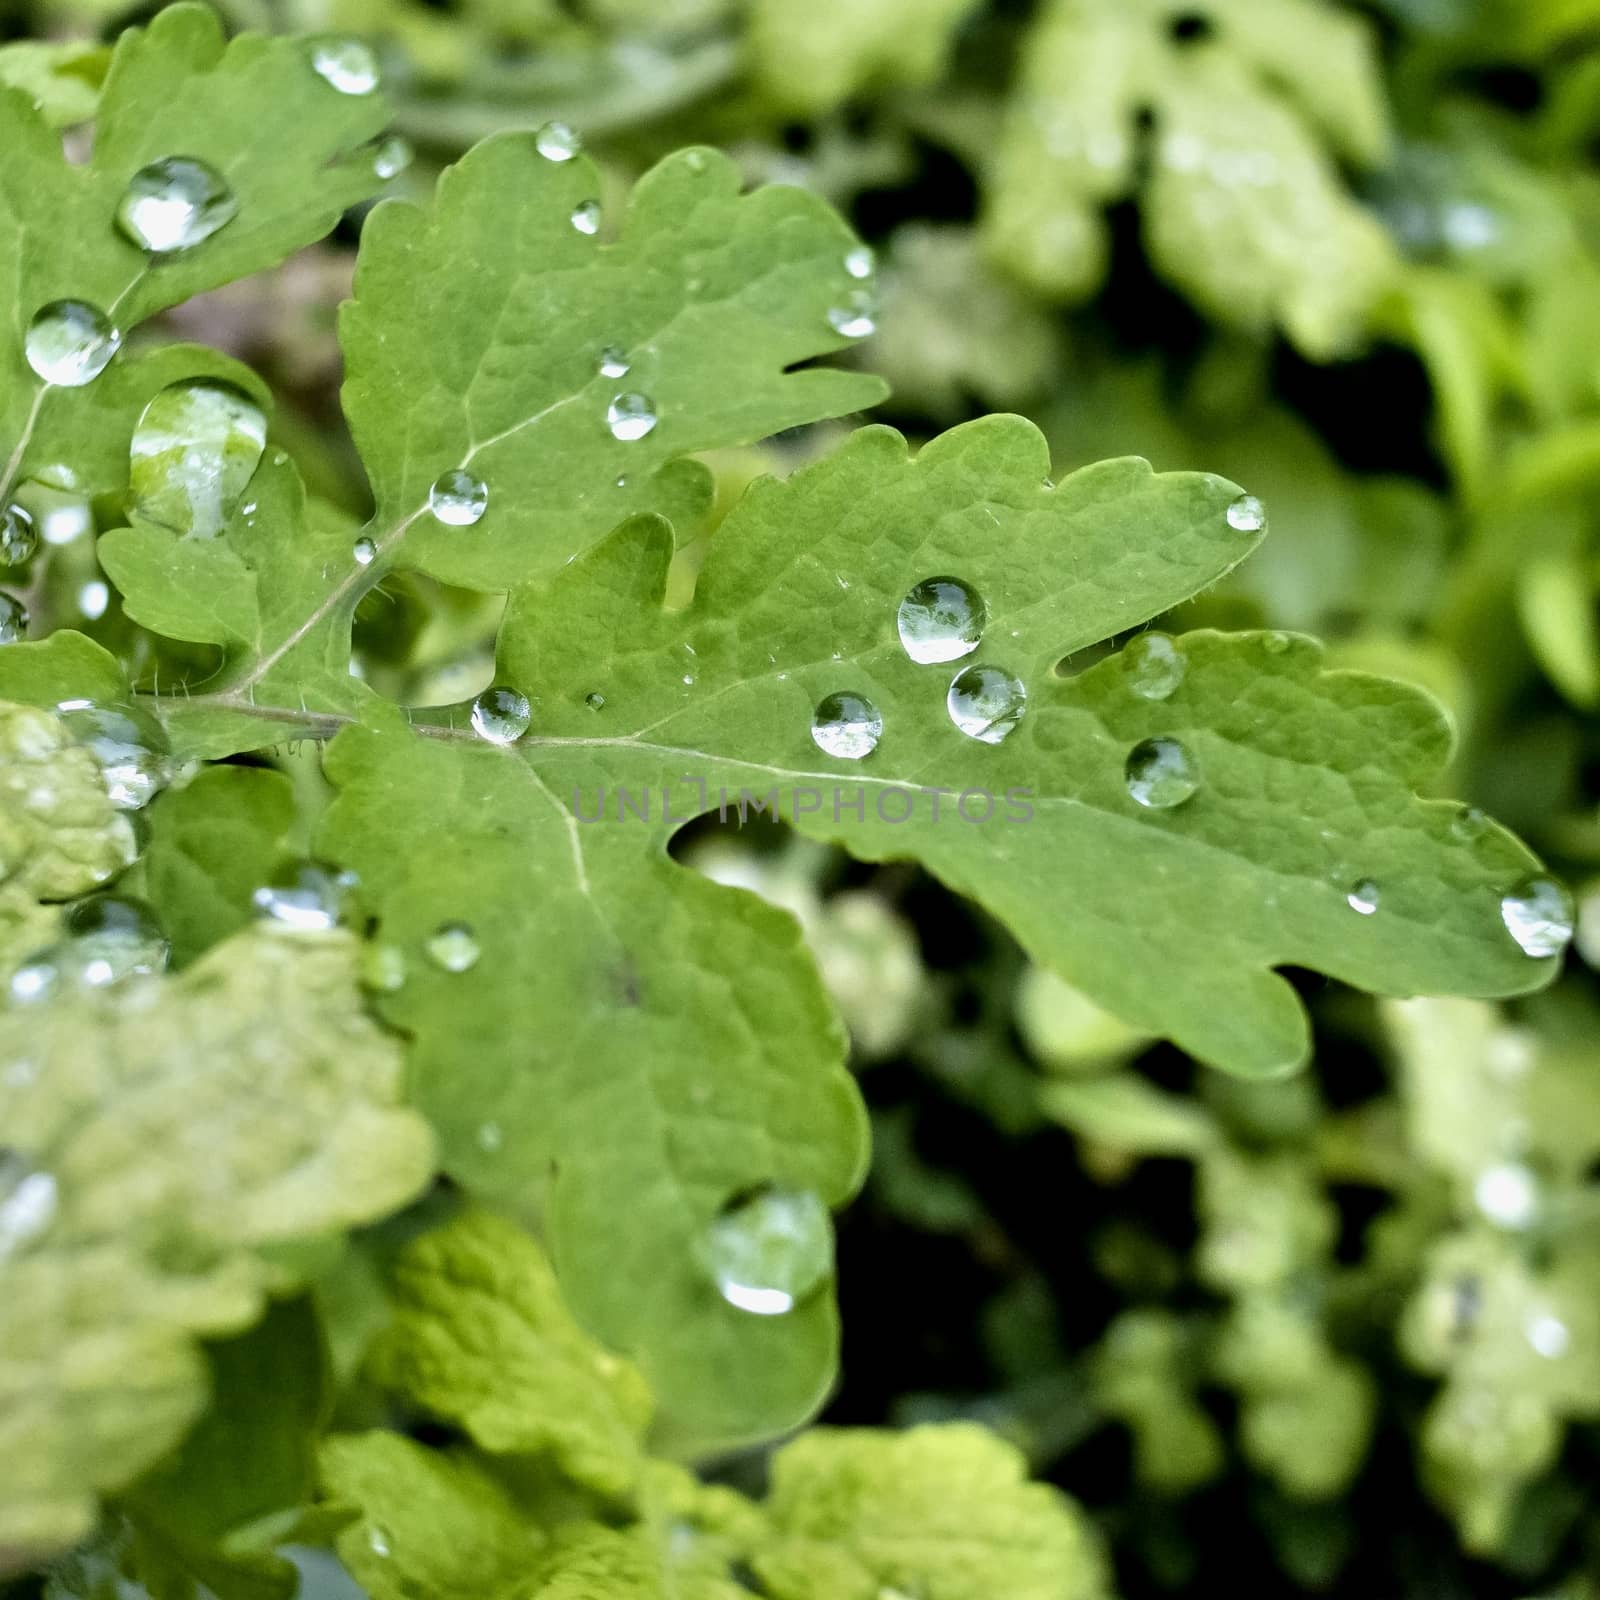 rain drops on green leaf in cloudy weather